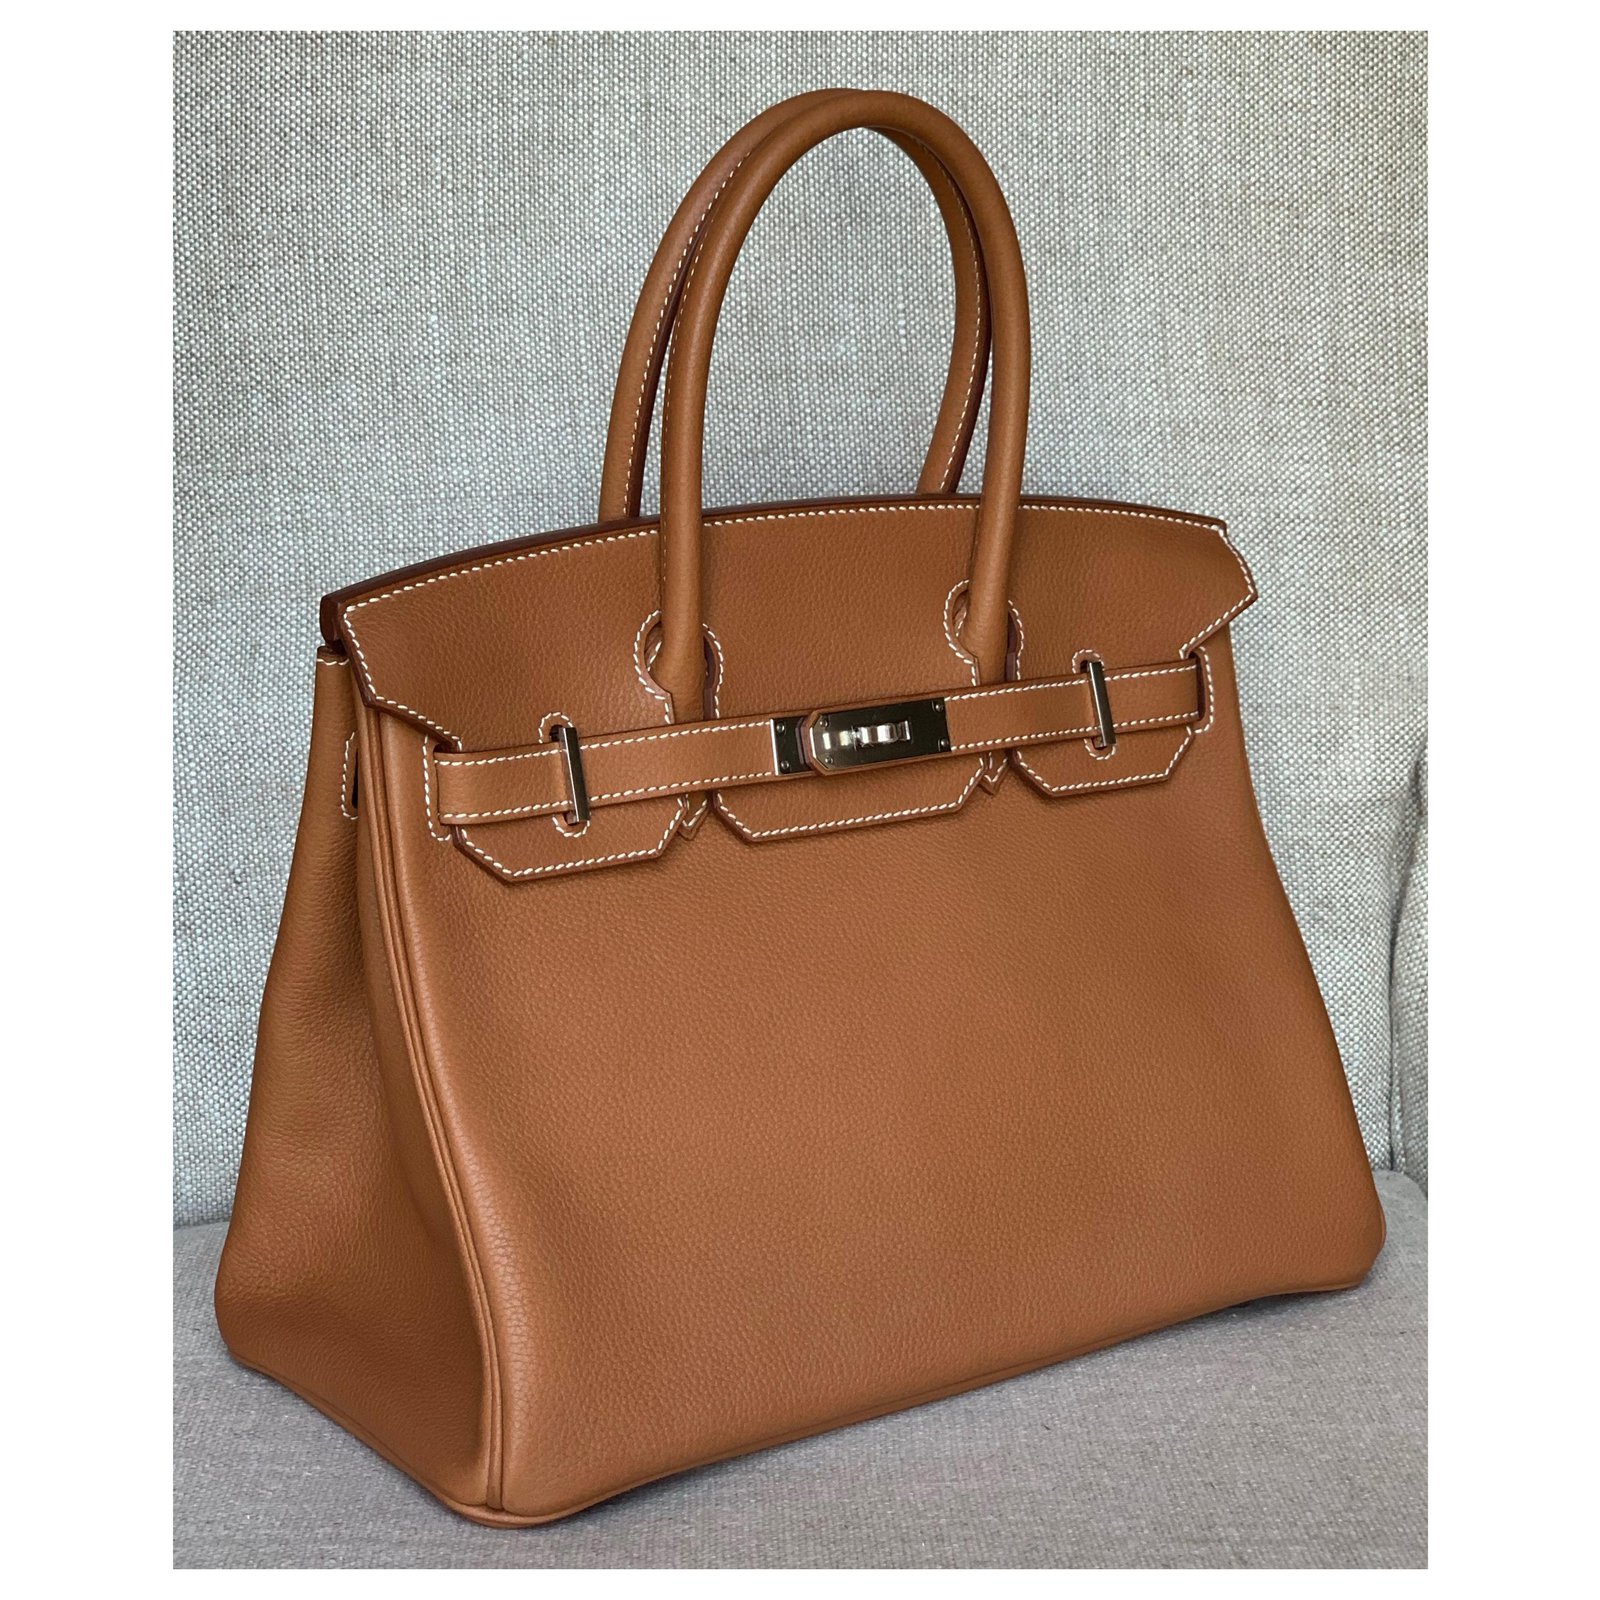 A FAUVE BARÉNIA FAUBOURG LEATHER HAC A DOS PM WITH PALLADIUM HARDWARE